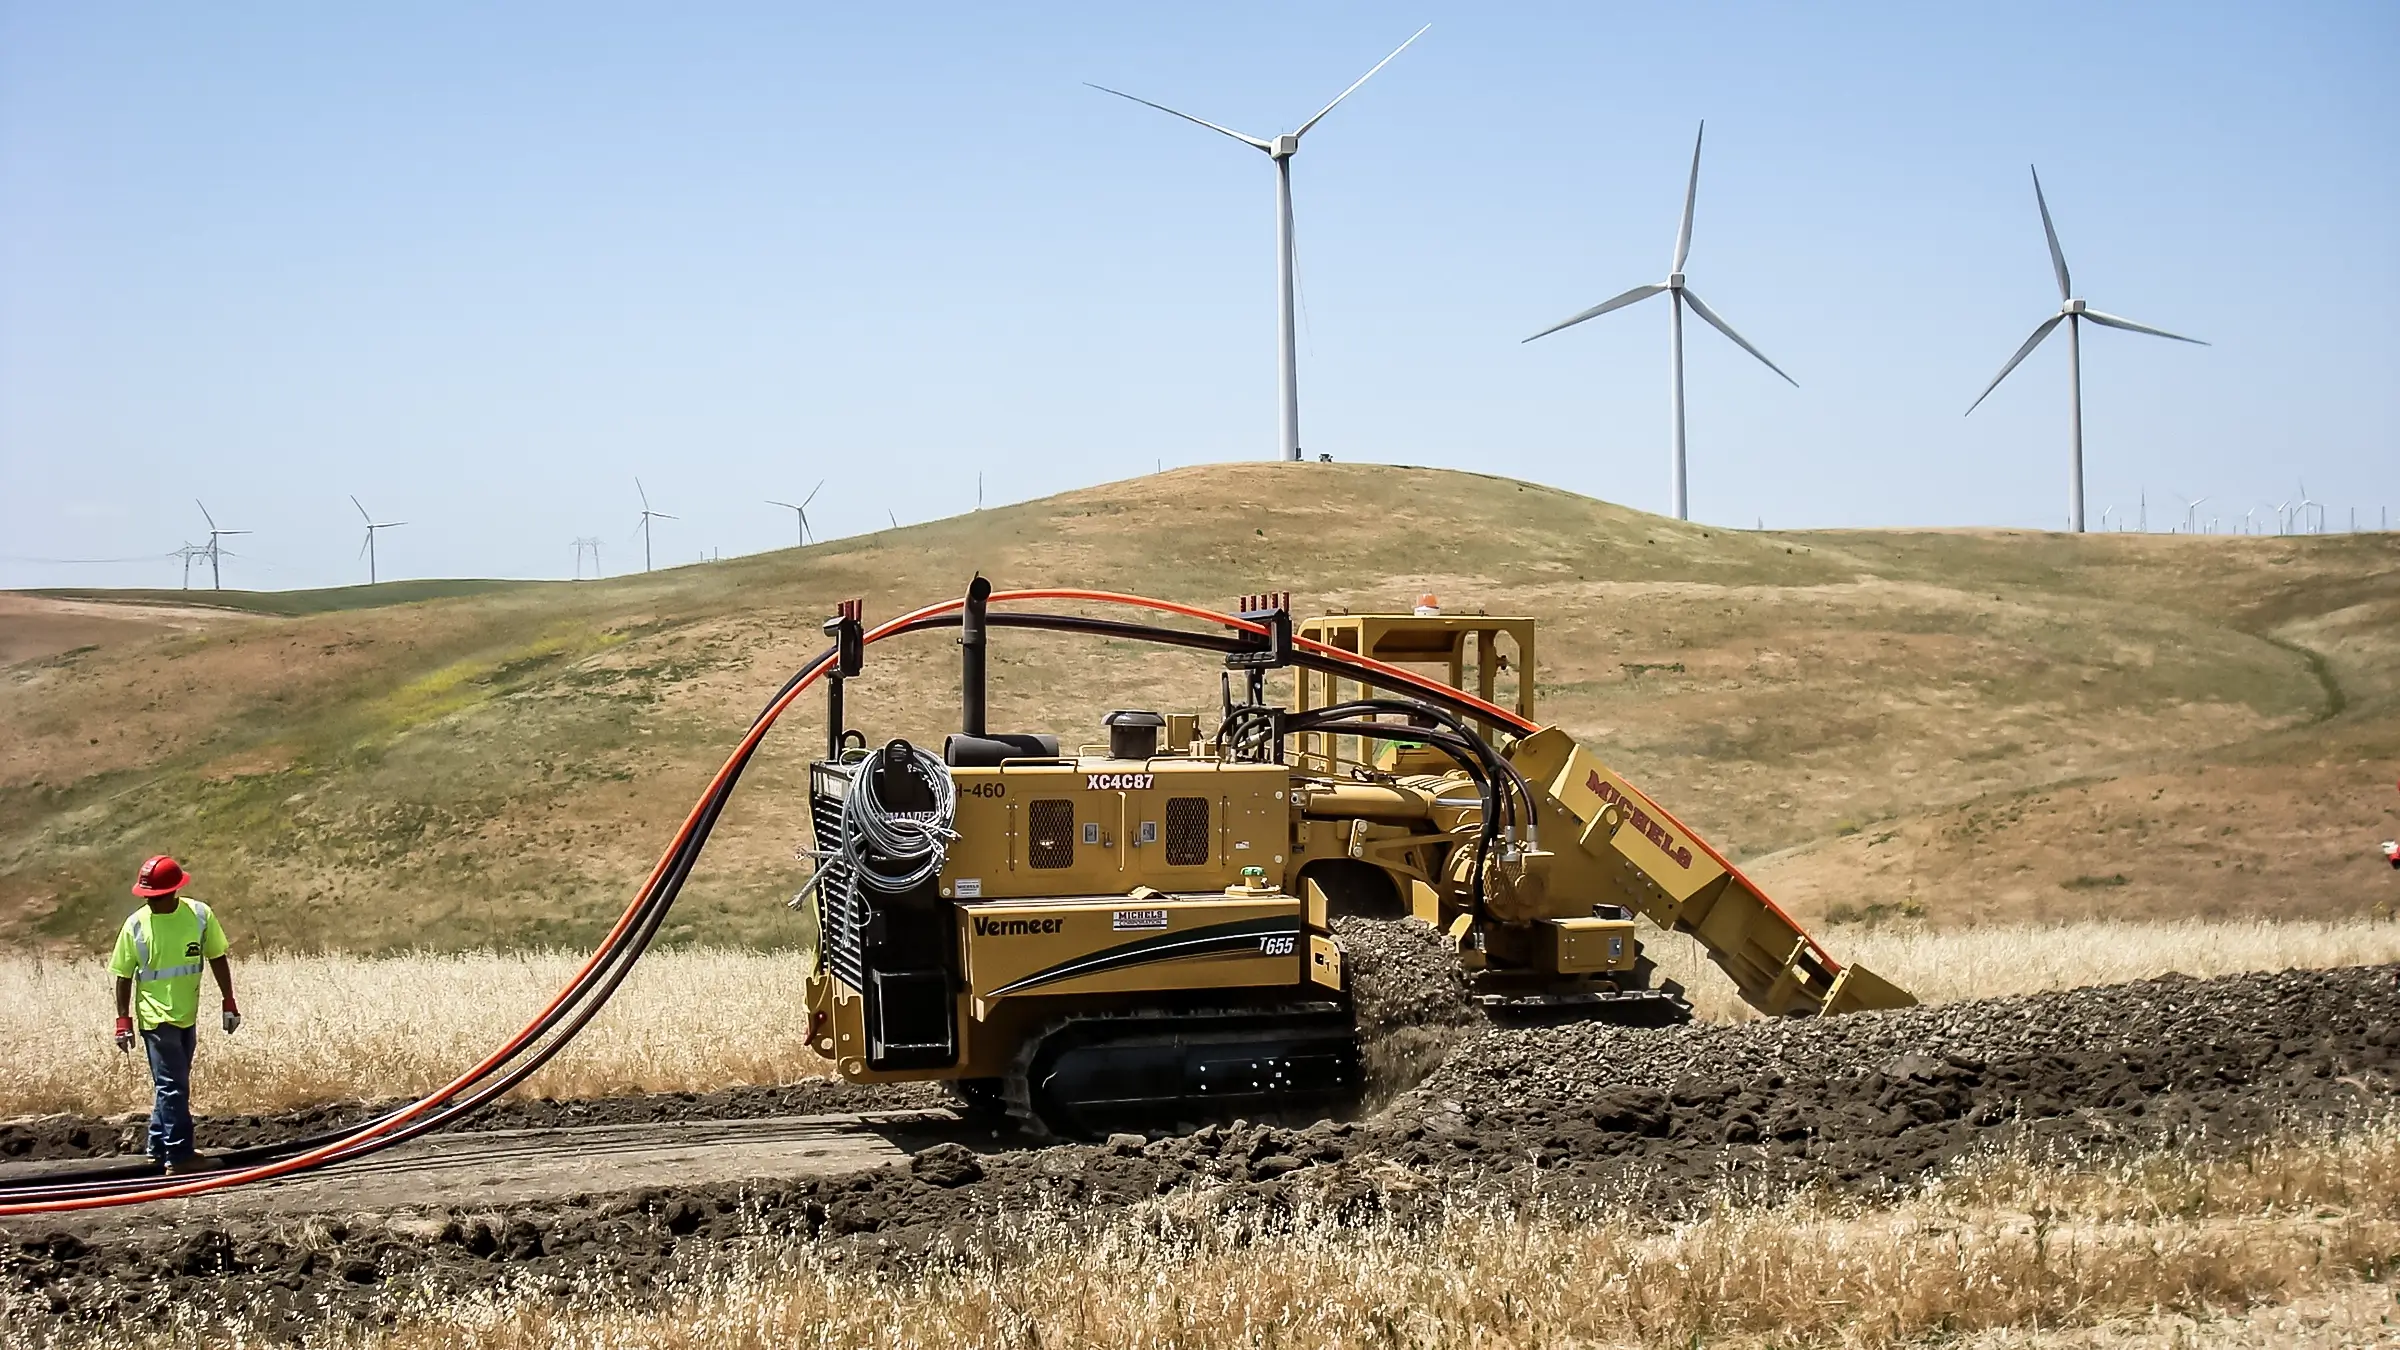 A crew member and cable installing machinery install cable near wind mills.